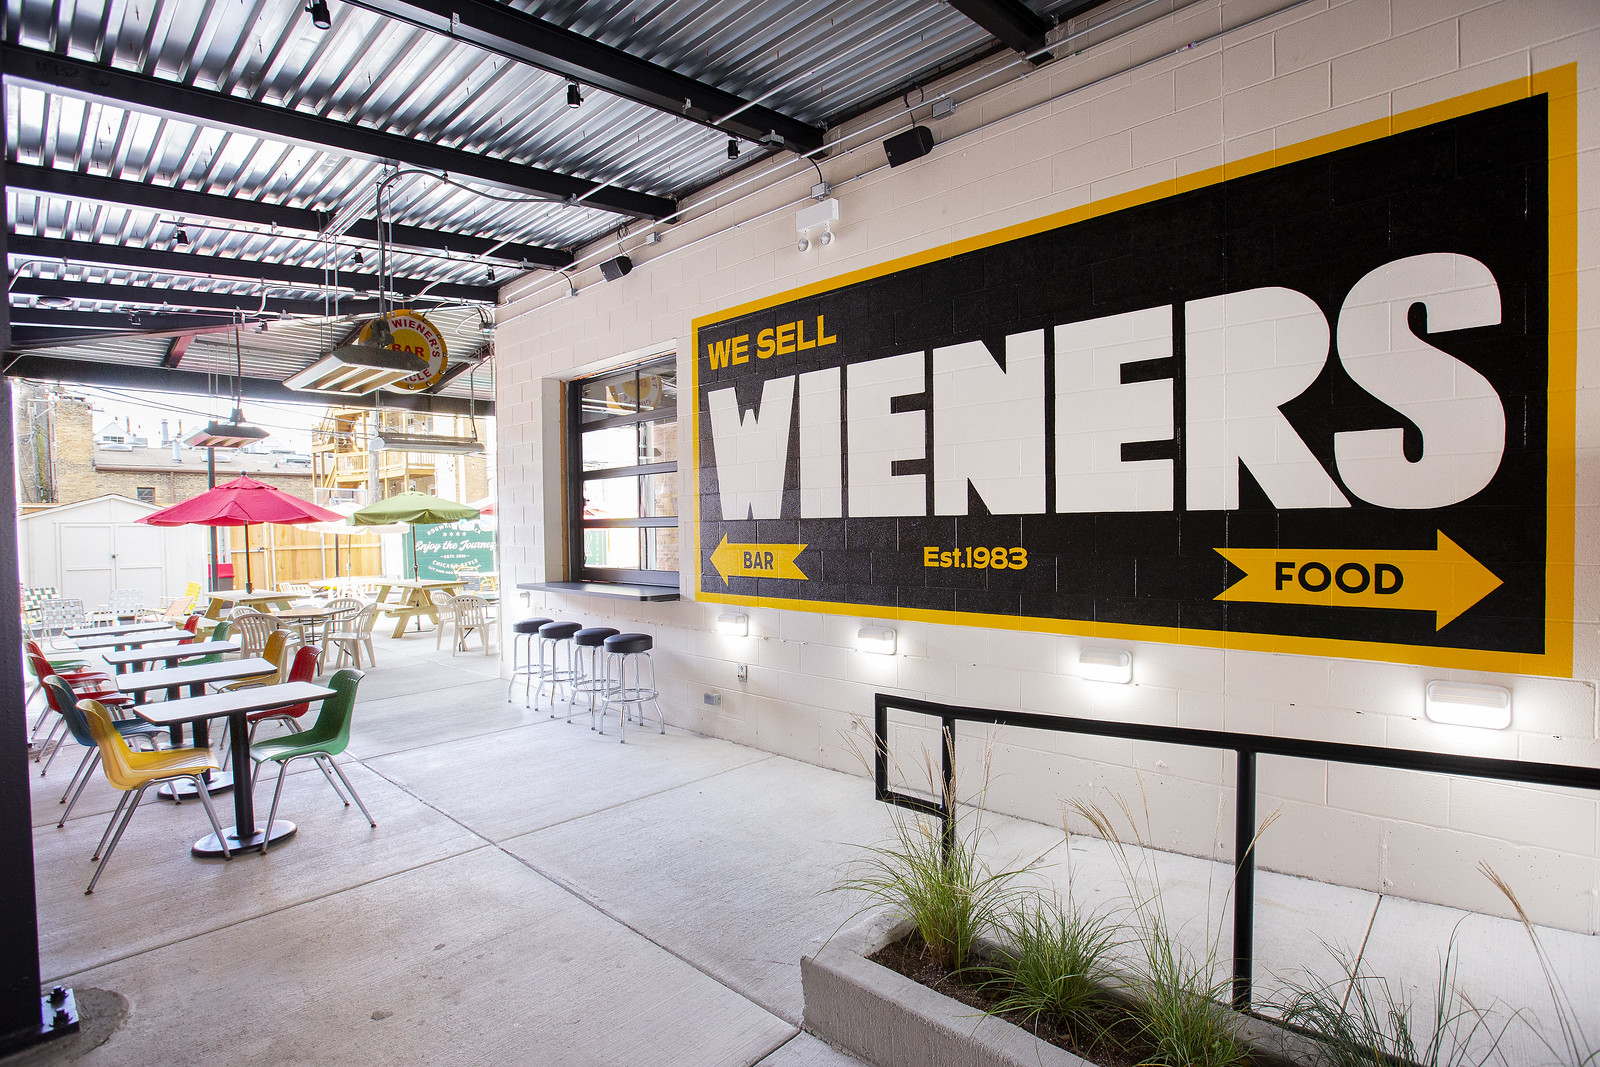 A large sign in brown and yellow reading “We sell wieners”